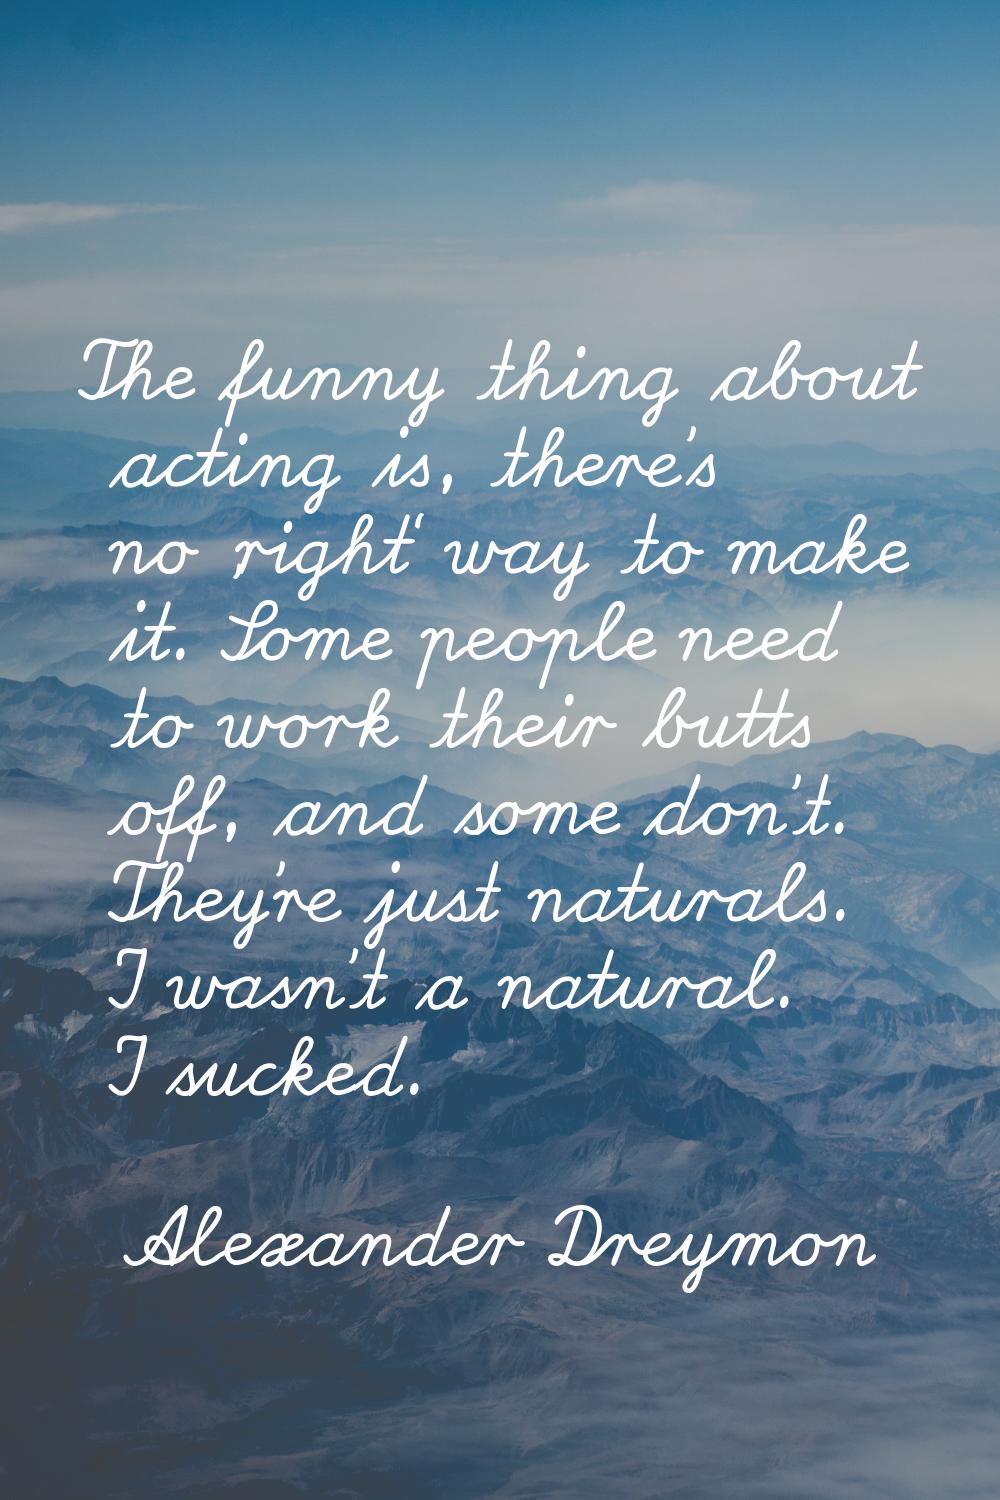 The funny thing about acting is, there's no 'right' way to make it. Some people need to work their 